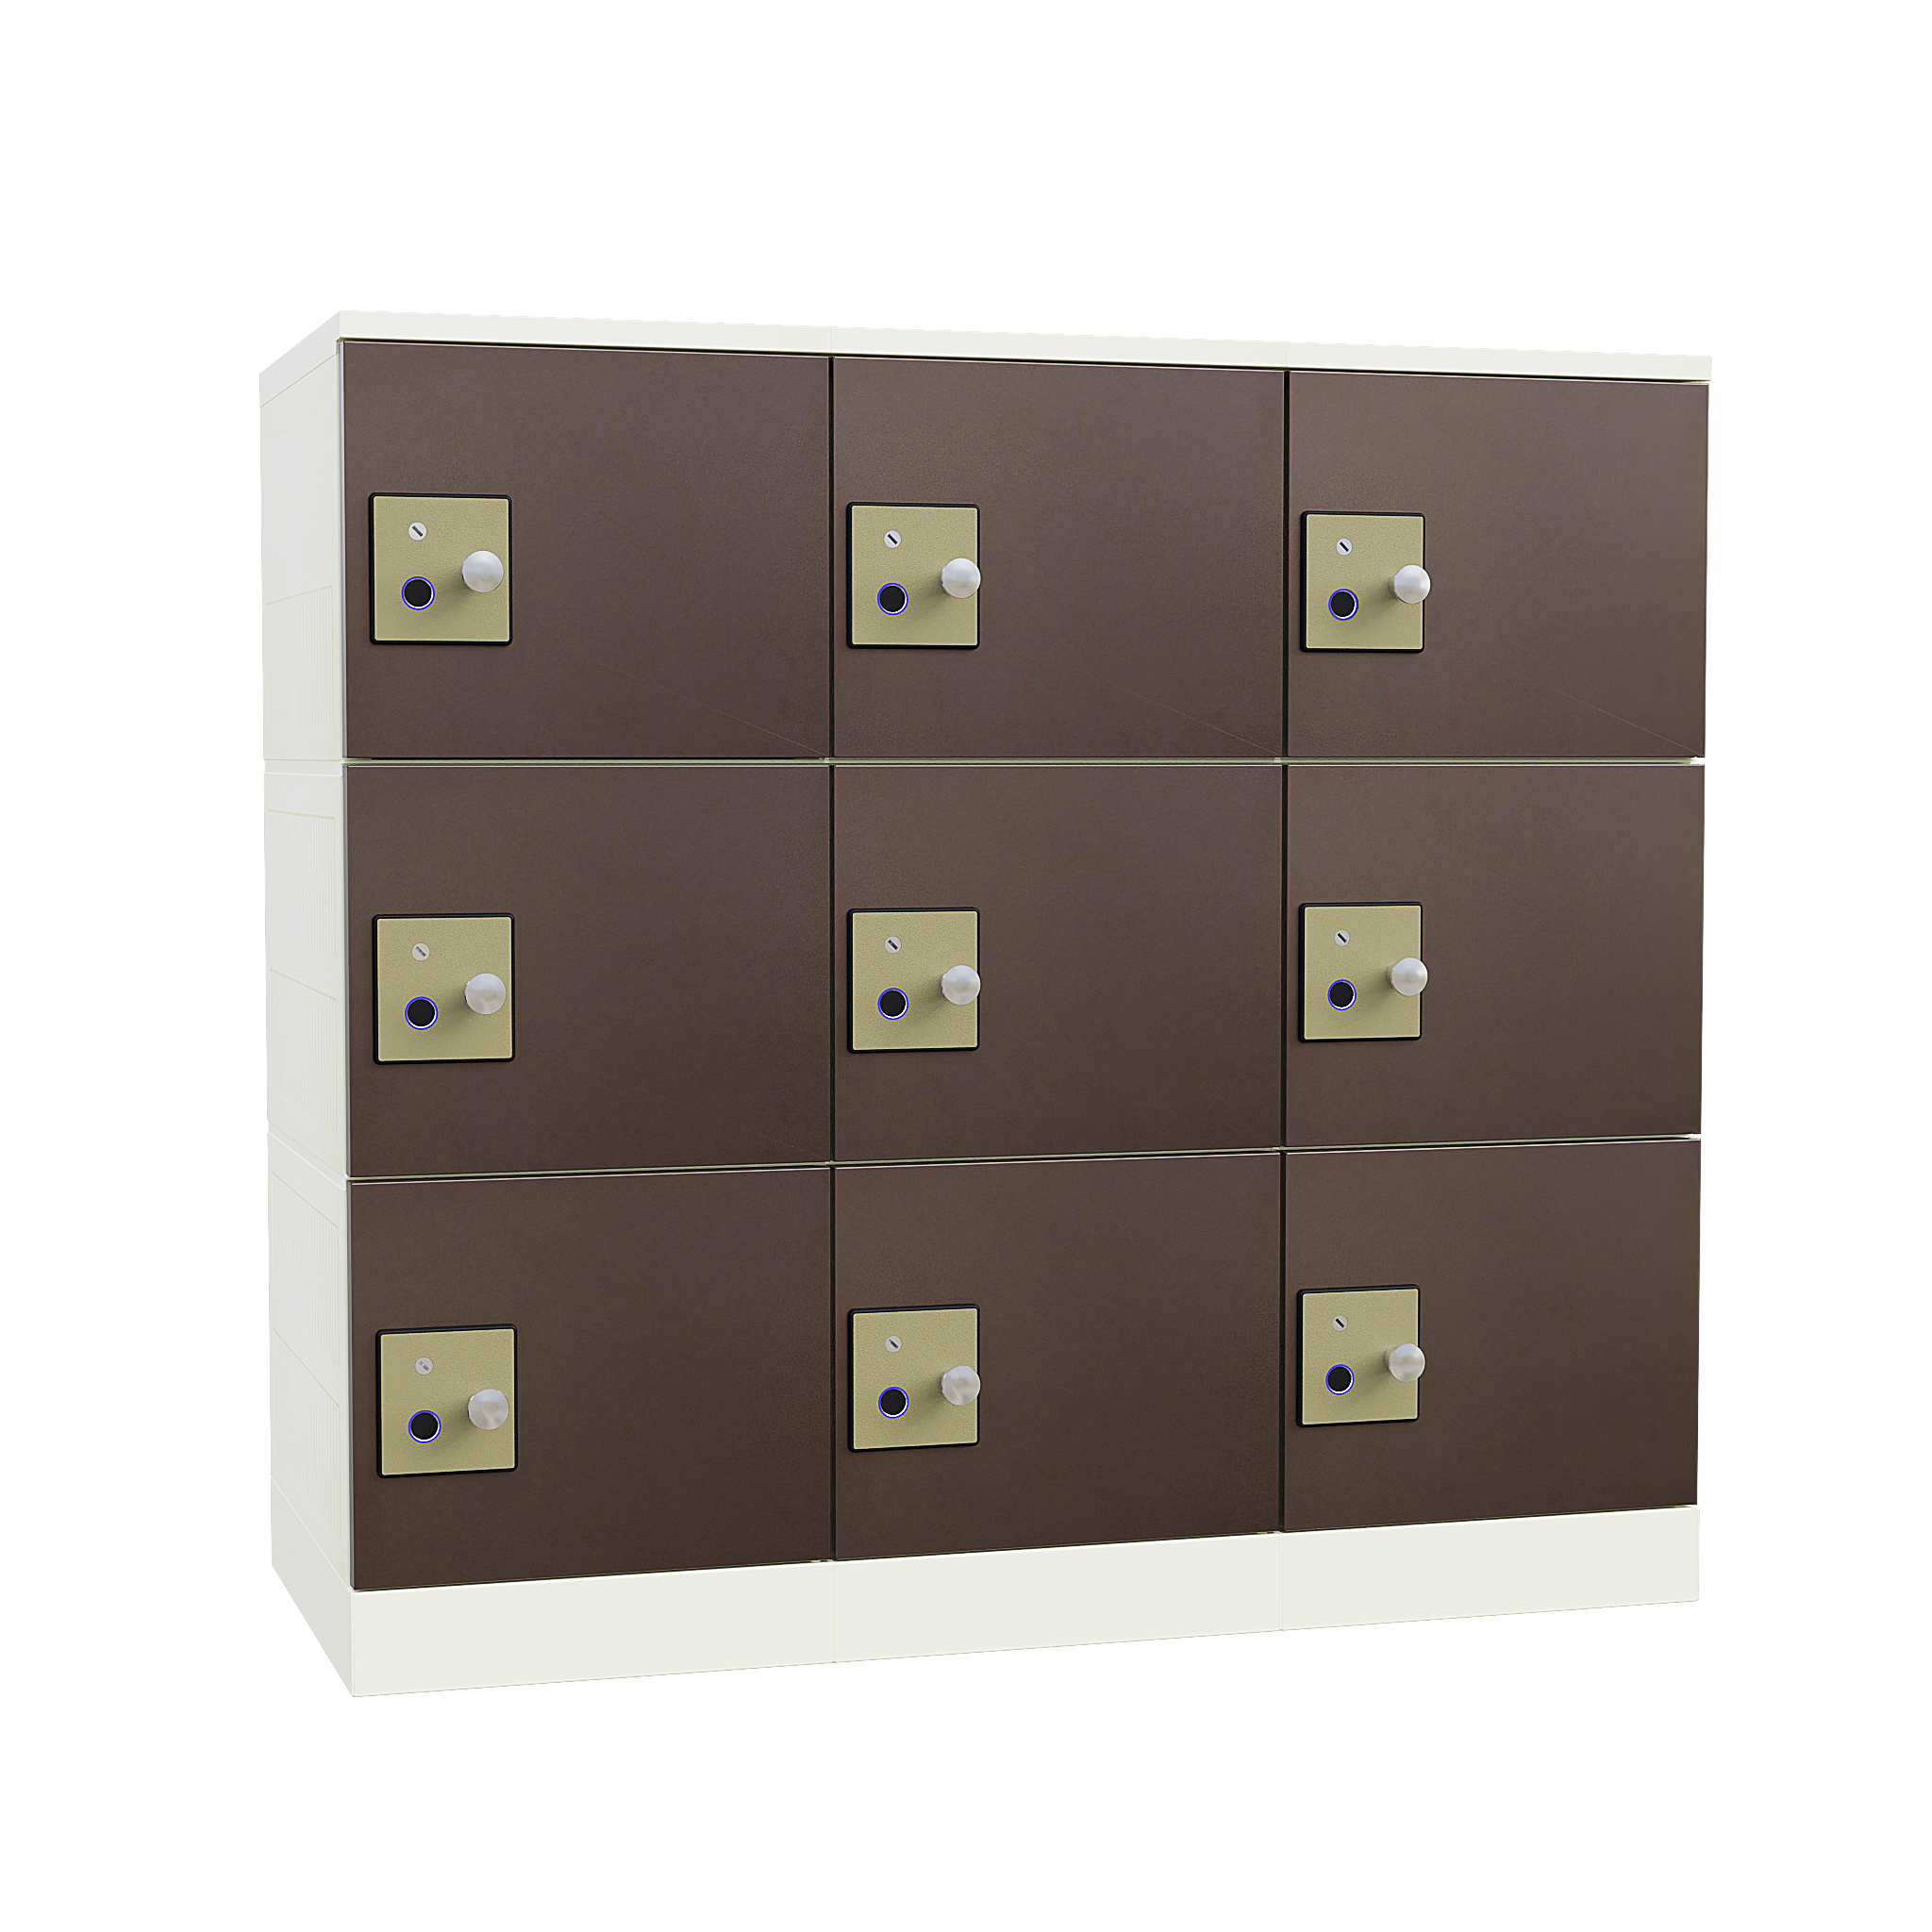 How to Choose the Right Smart Parcel Locker Manufacturer